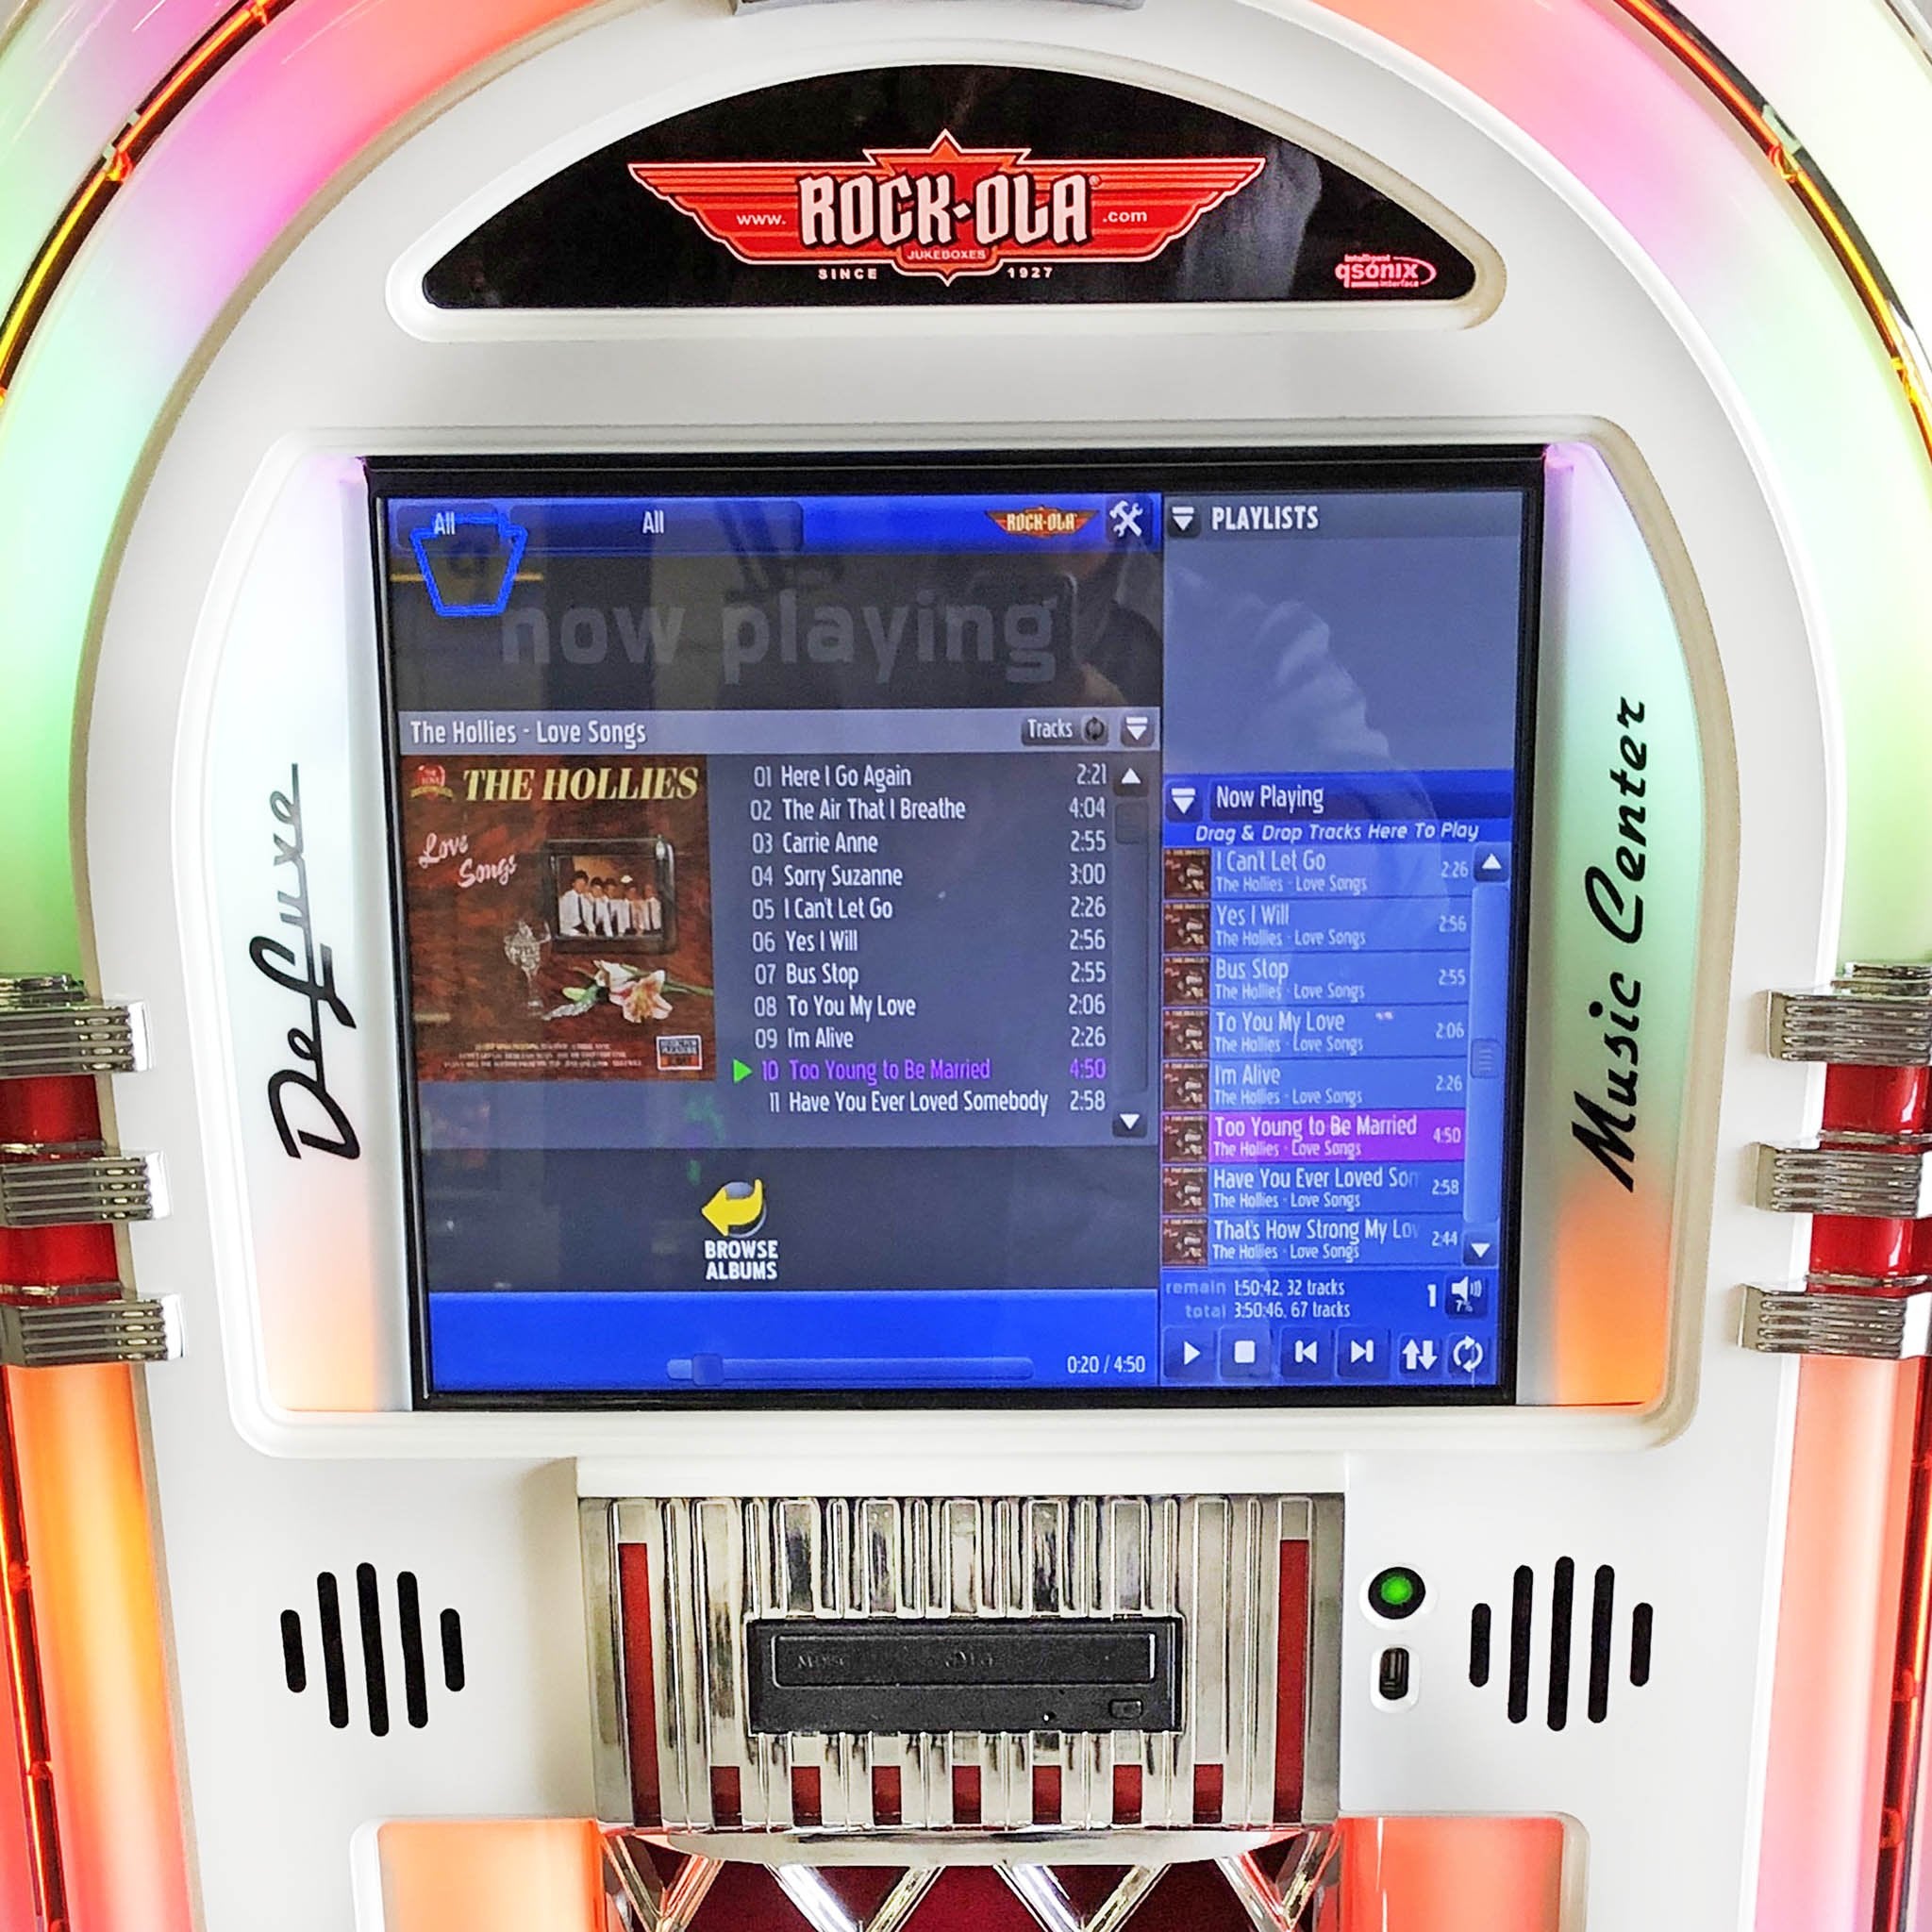 Rock-Ola Bubbler Digital Music Center Jukebox in Gloss White with Bluetooth